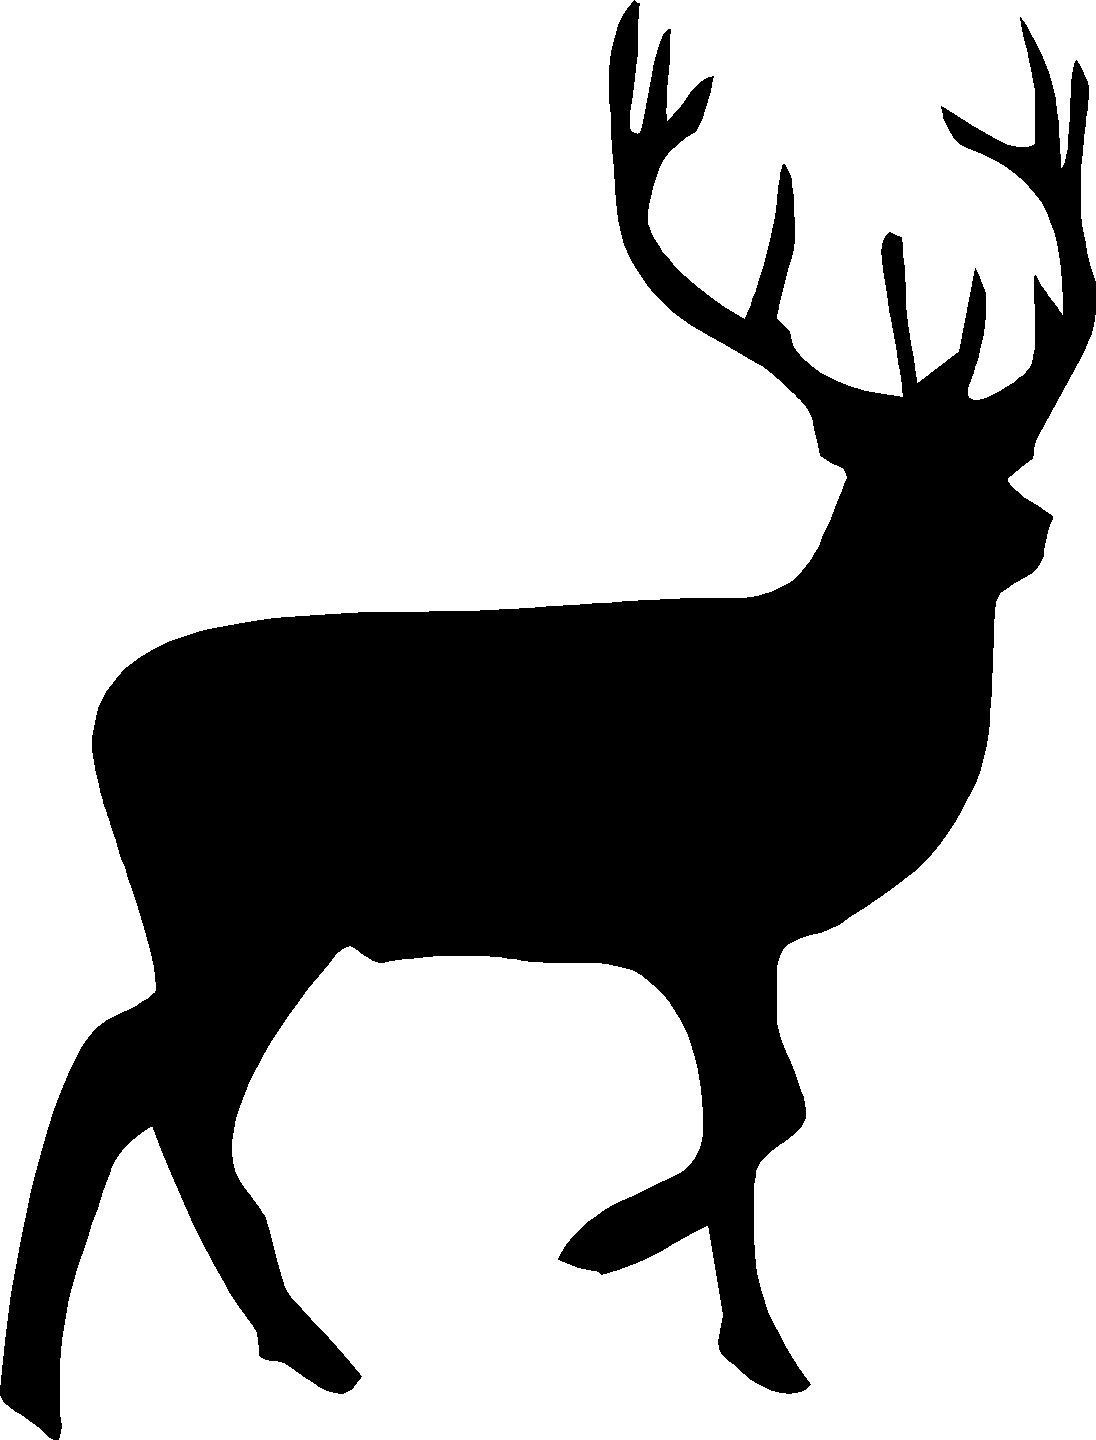 Buck 20clipart - Free Clipart Images